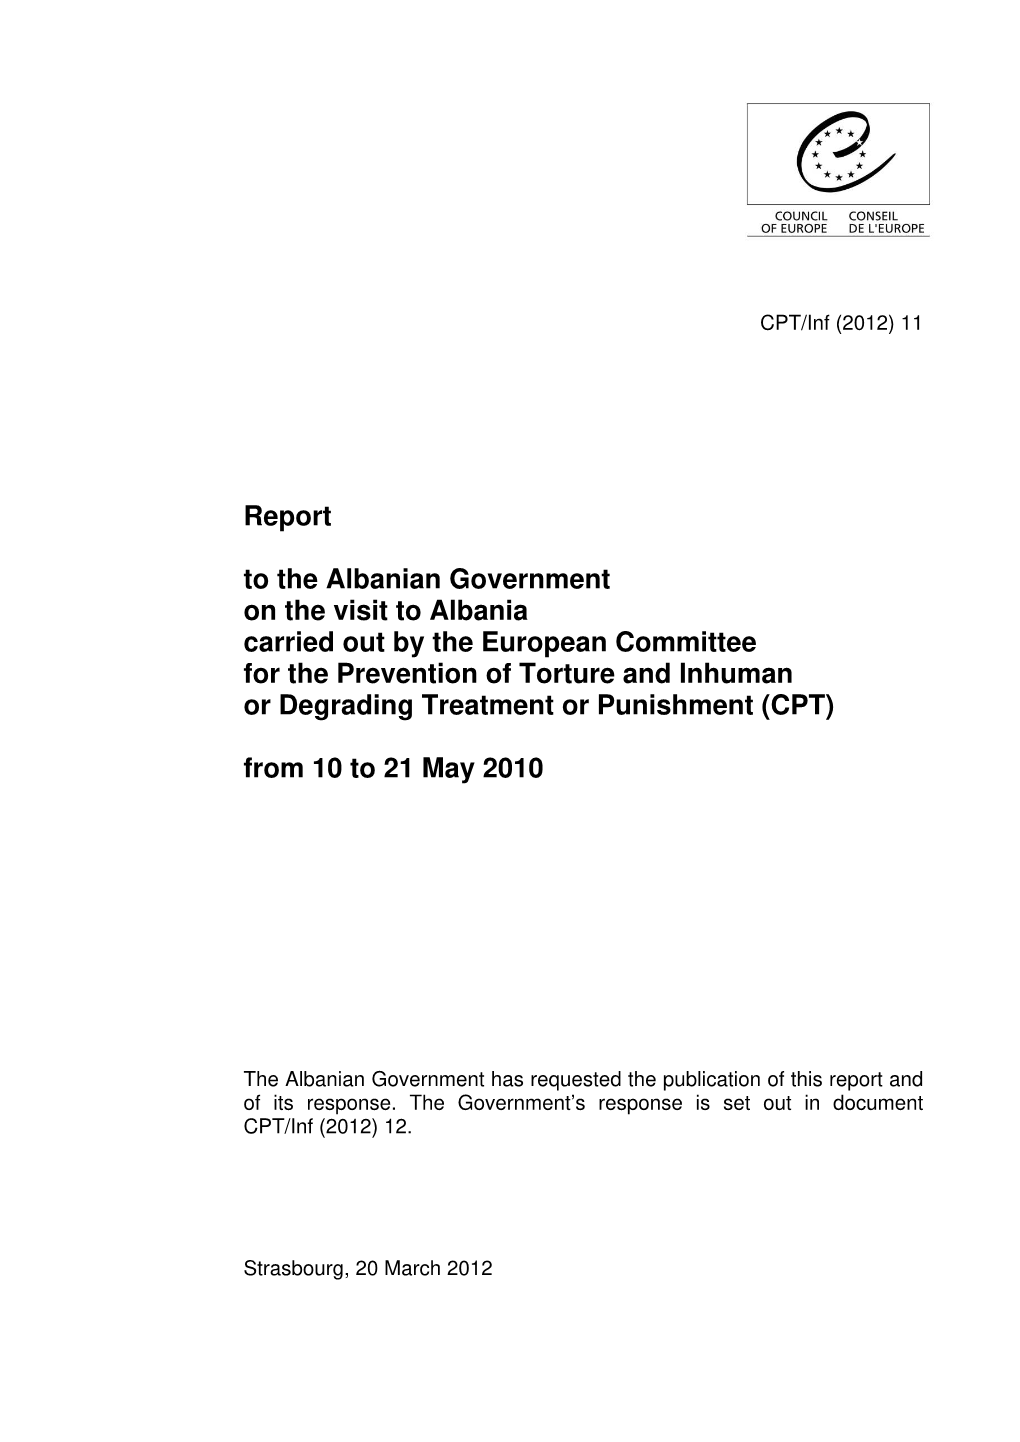 Report to the Albanian Government on the Visit to Albania Carried out by the European Committee for the Prevention of Torture An